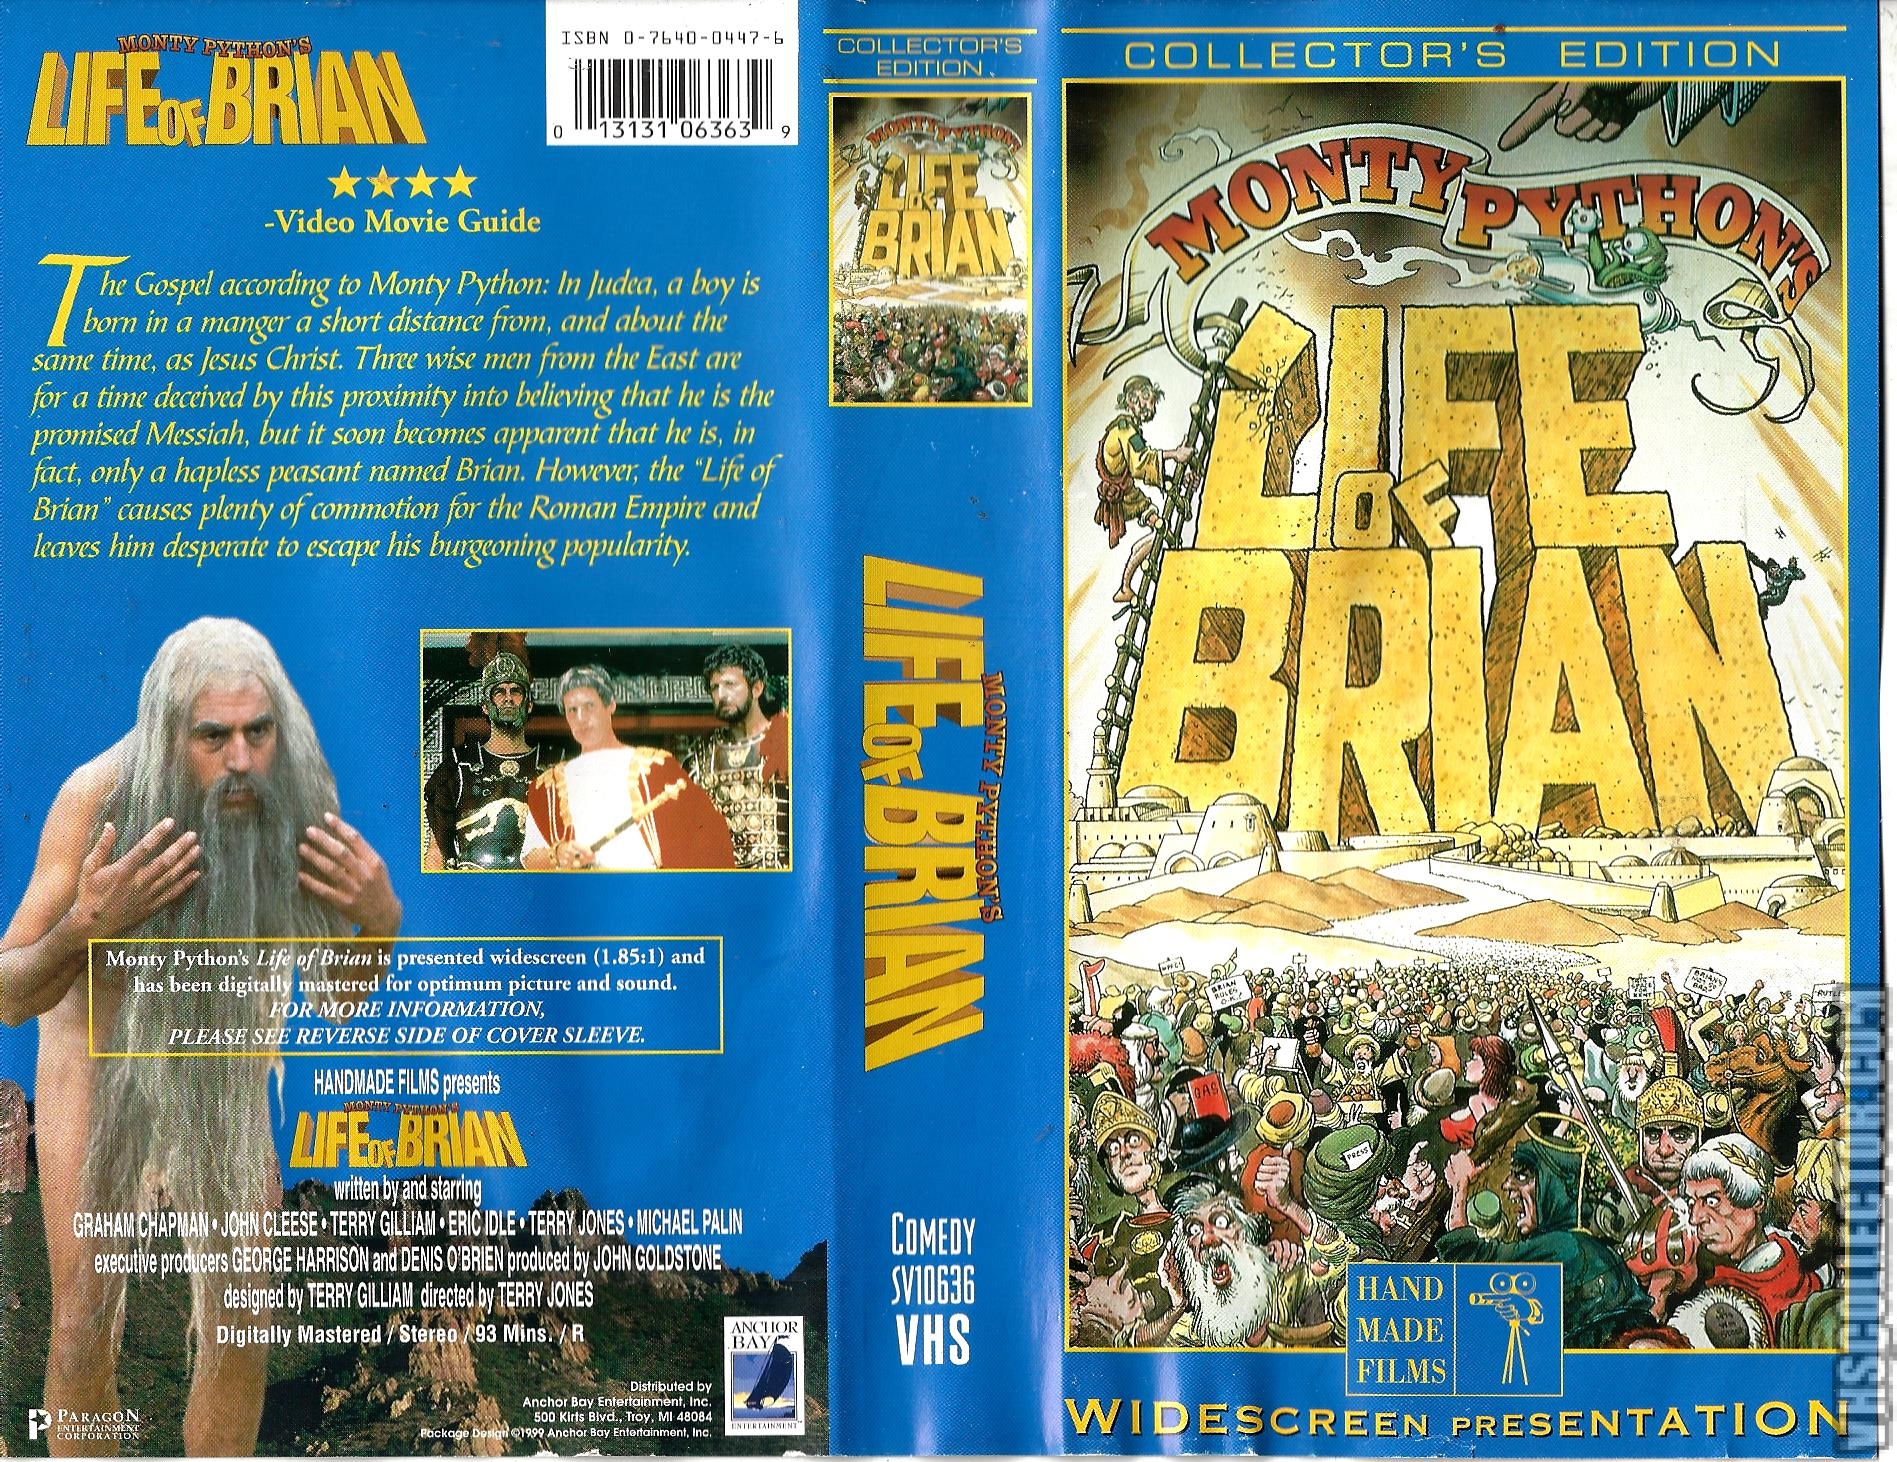 Monty Python's The Life of Brian | VHSCollector.com